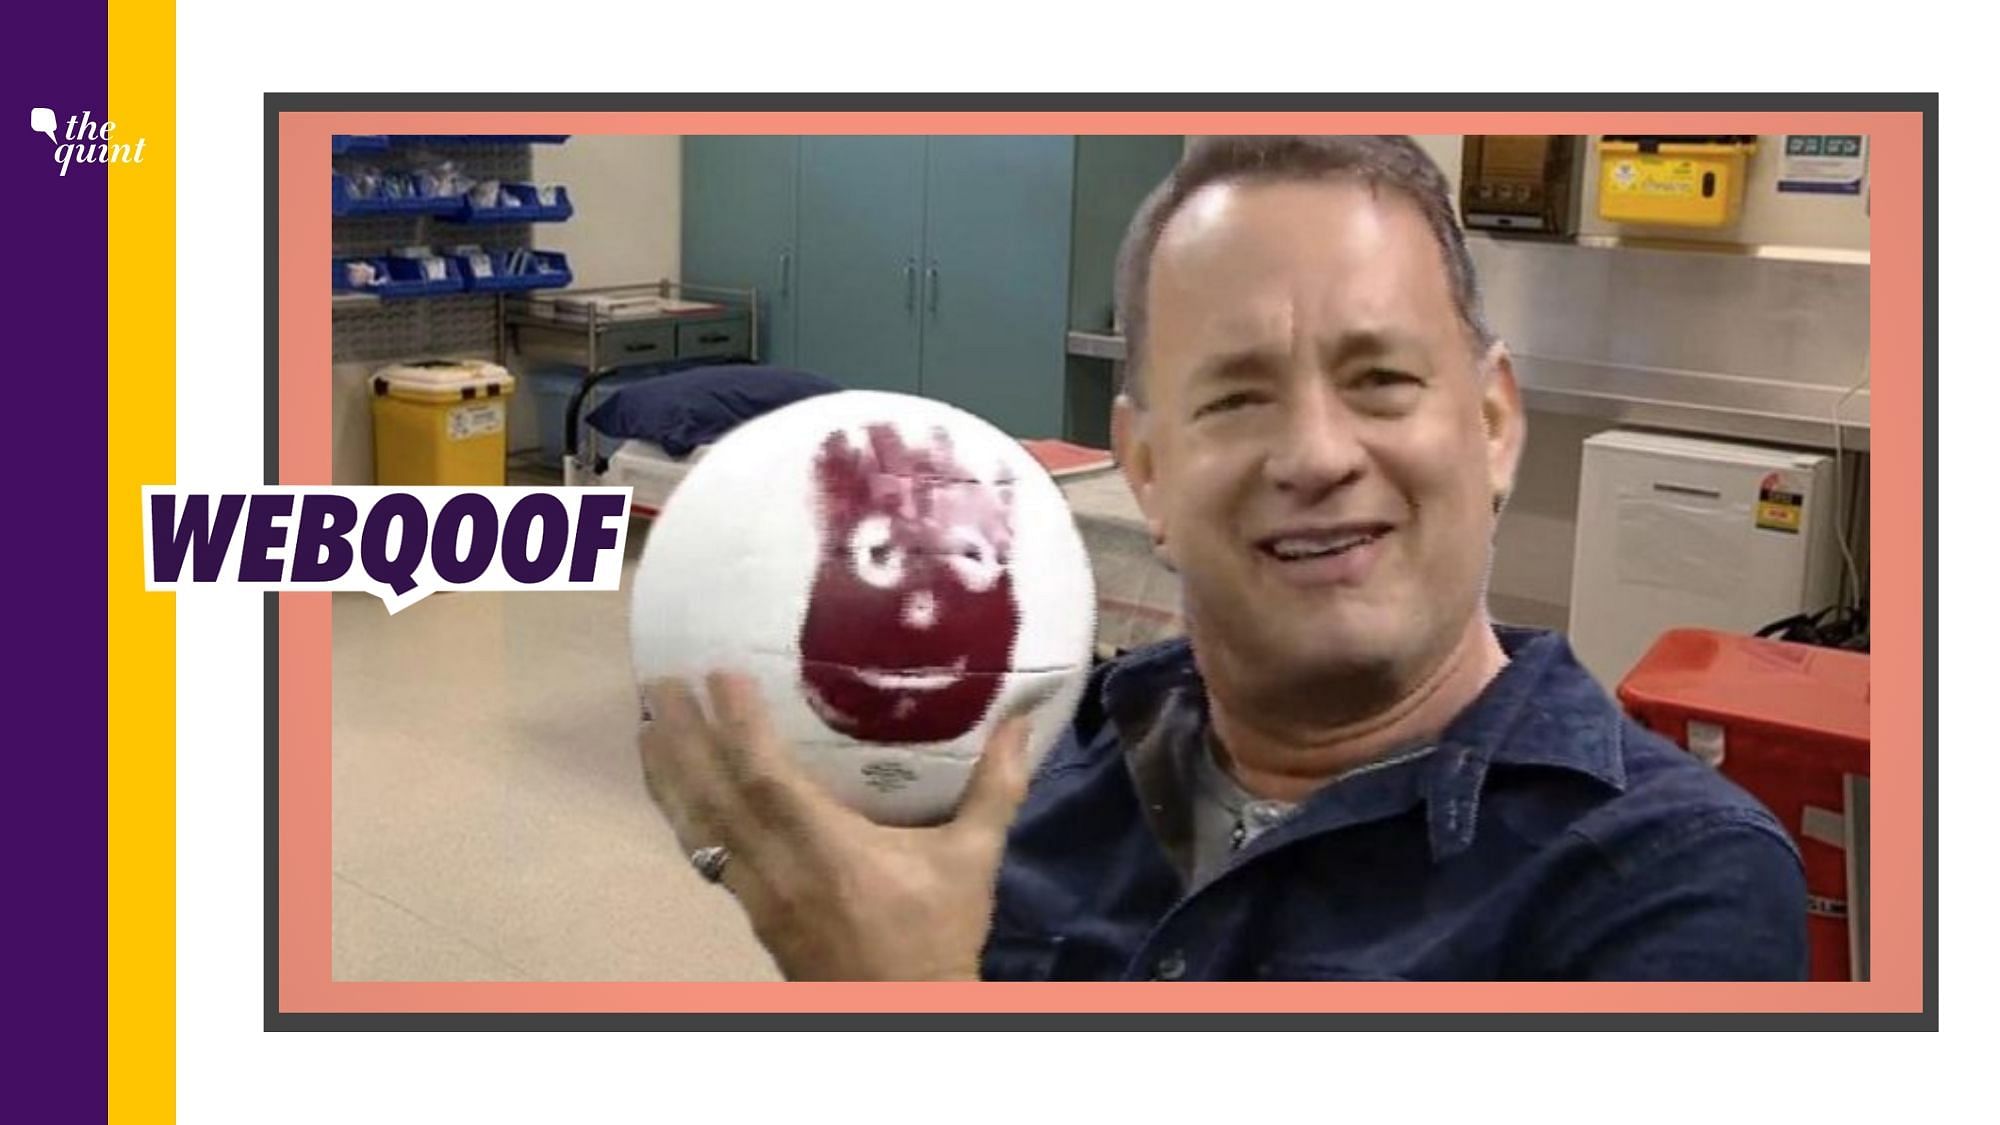 The image of Tom Hanks taken in 2015 has been morphed to claim that Gold Coast Hospital gifted a volleyball to the actor while he is under quarantine.